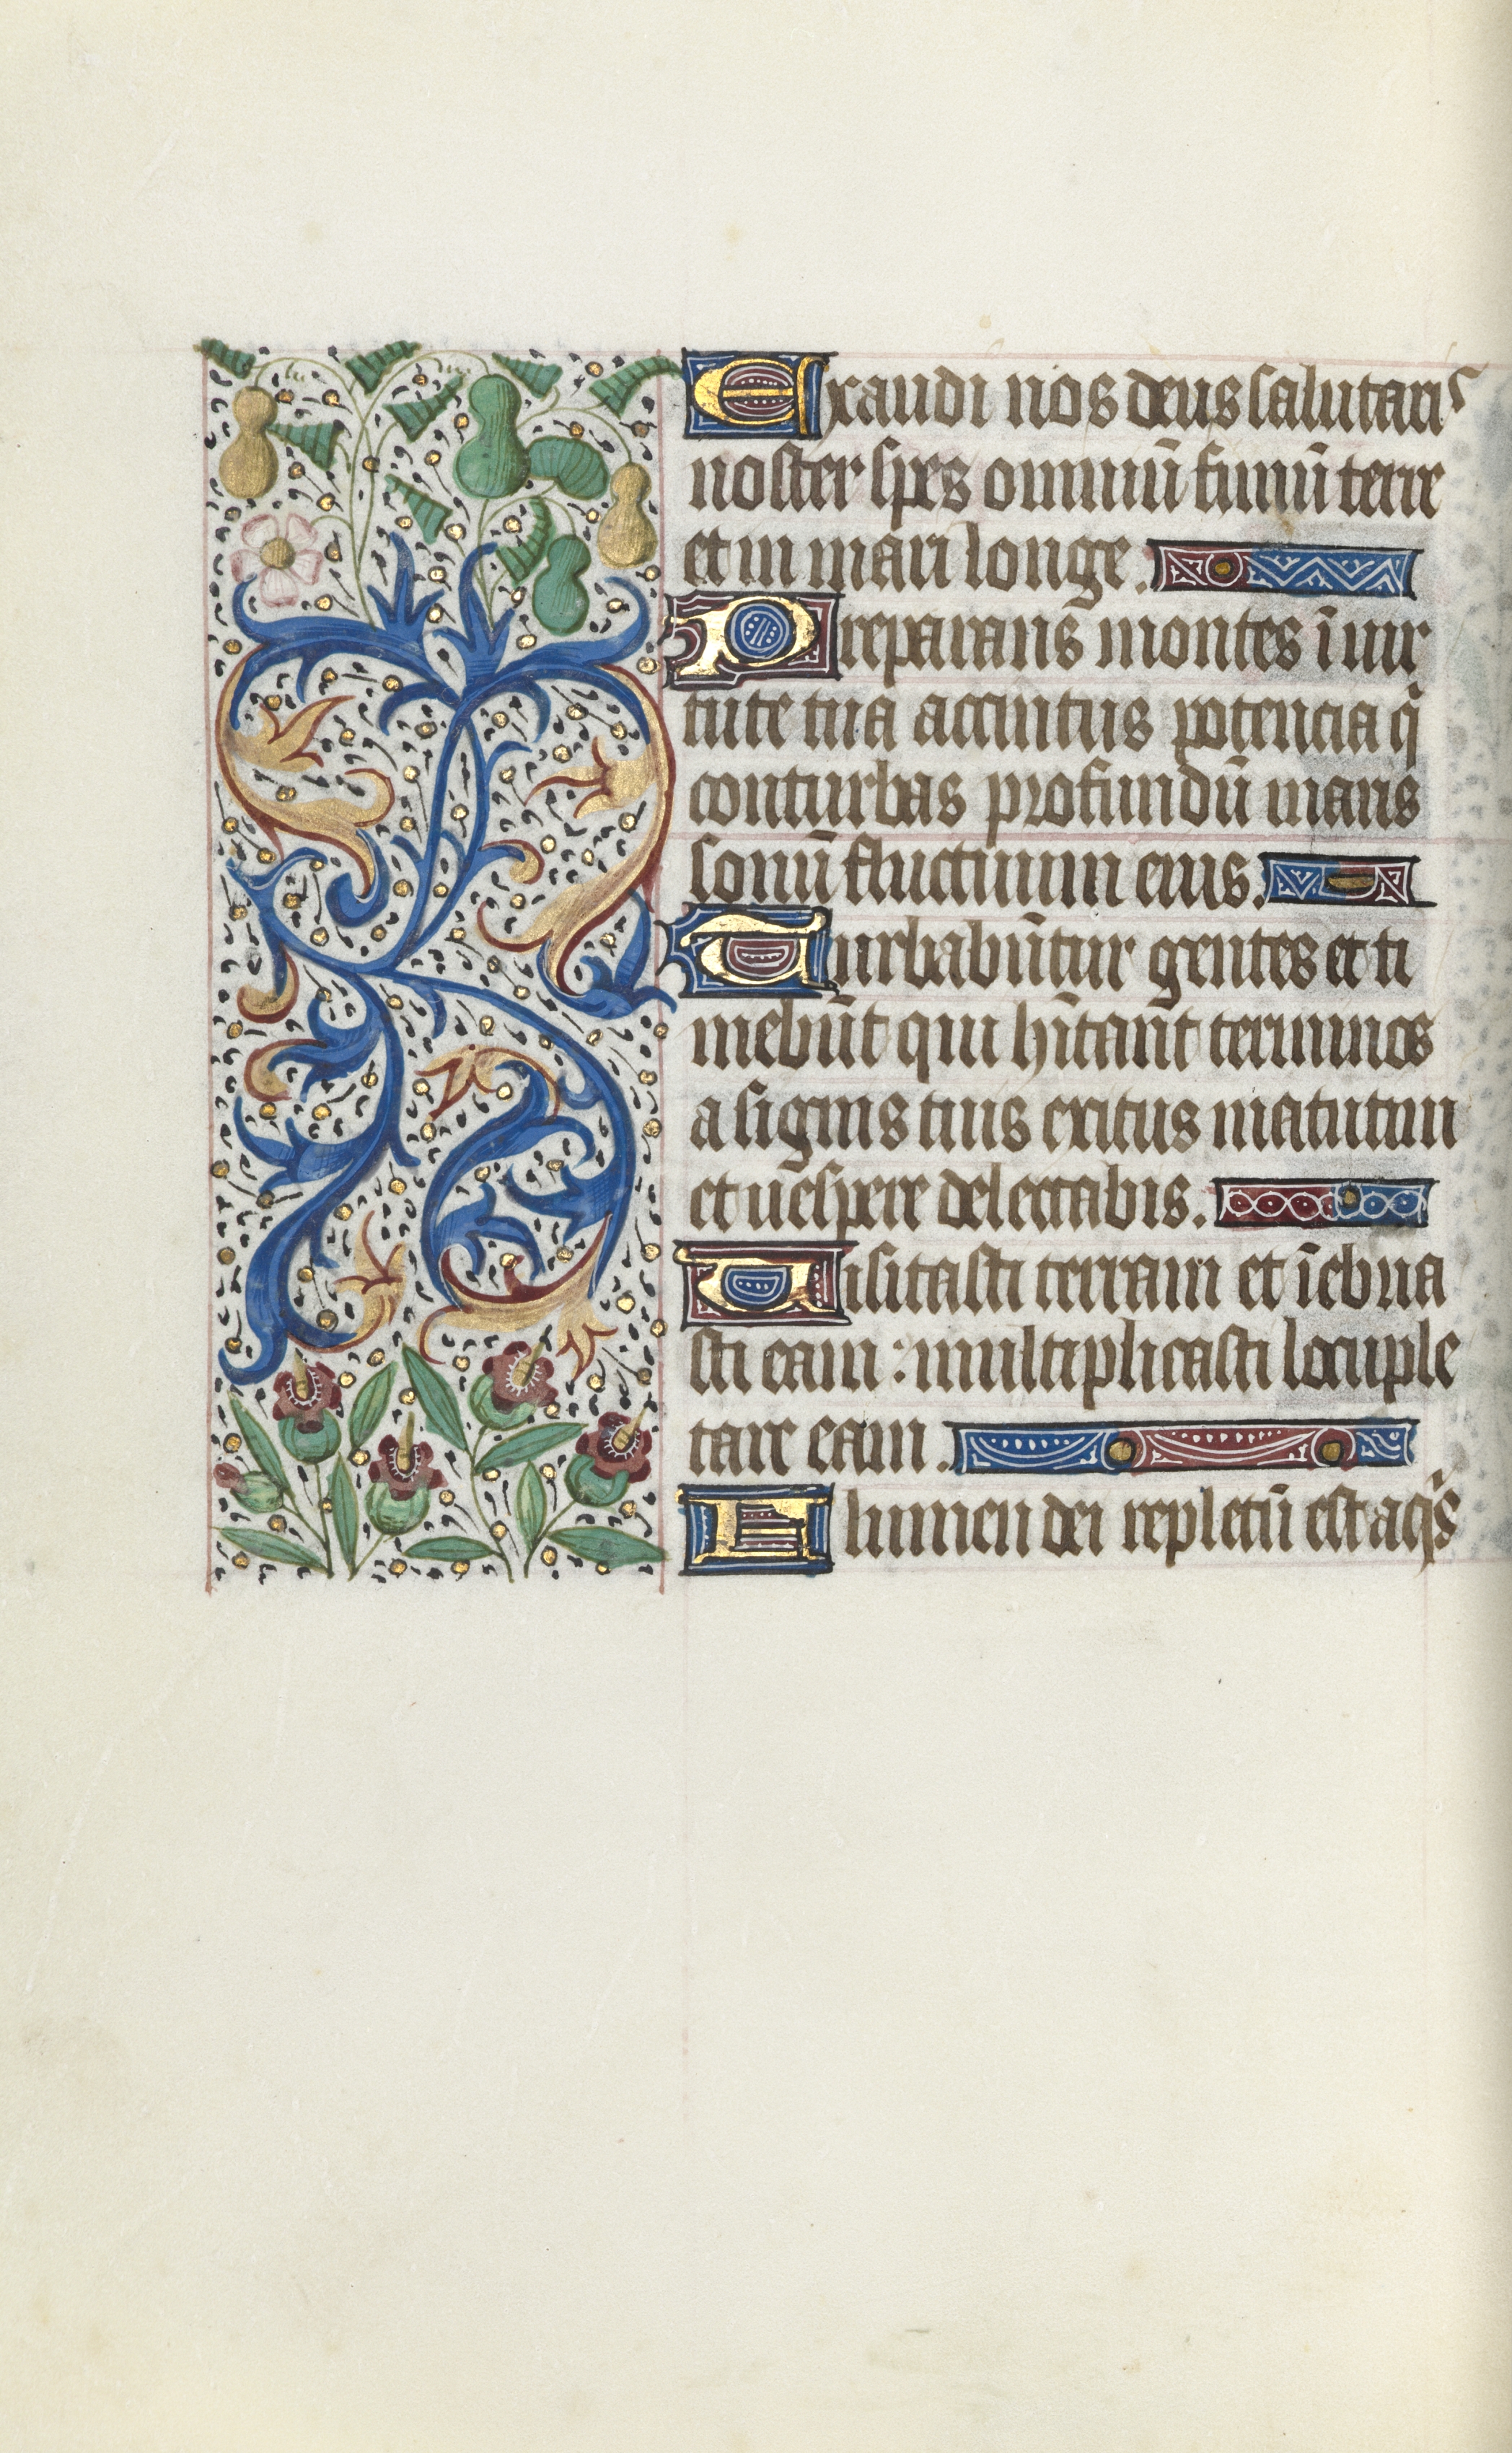 Book of Hours (Use of Rouen): fol. 136v